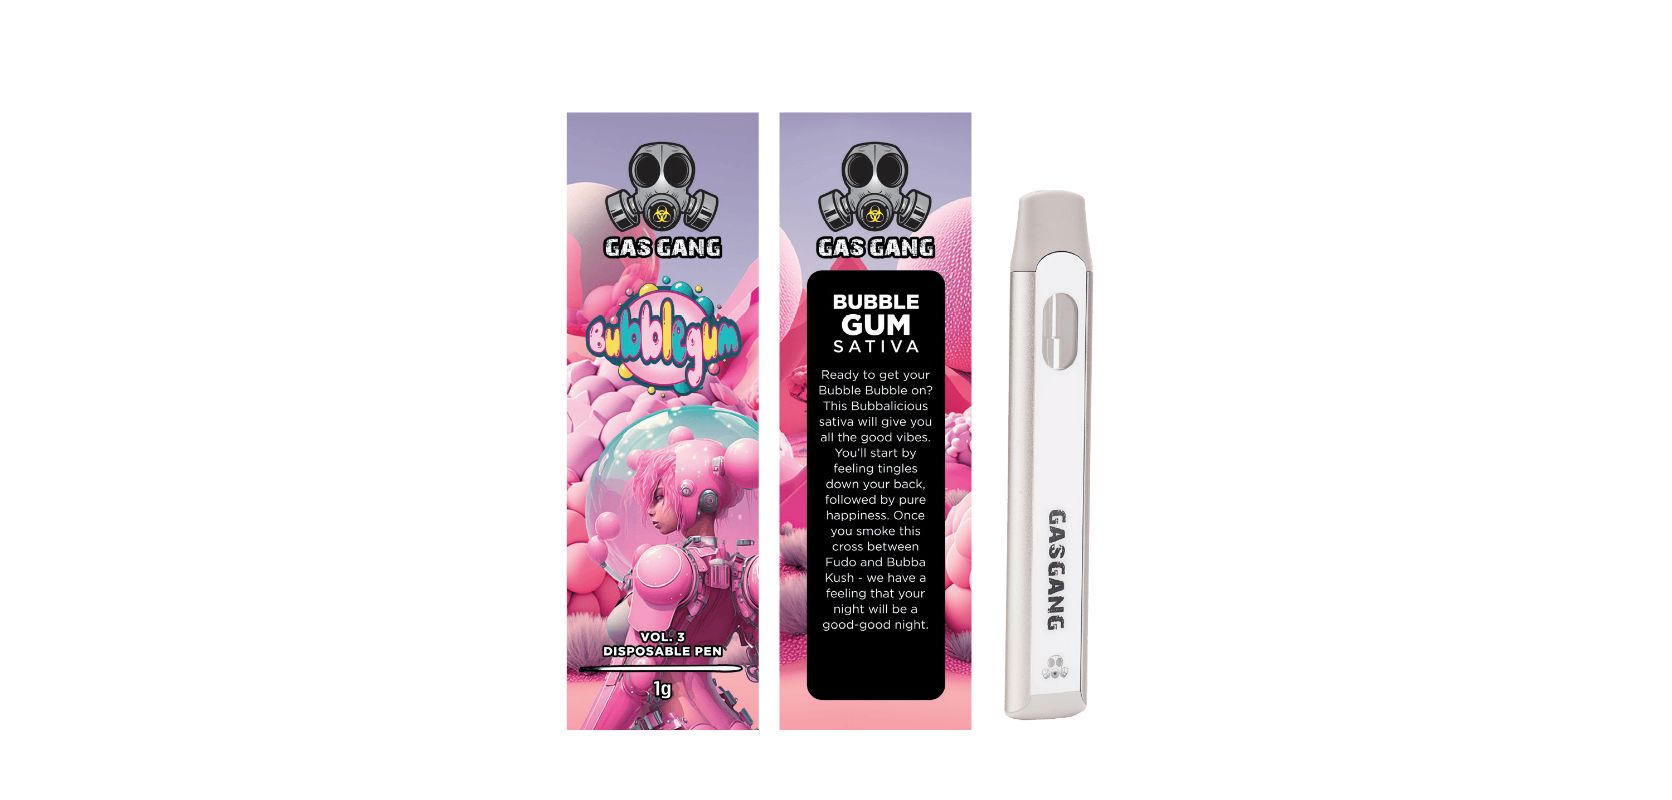 For those seeking to buy distillate cartridges online in Canada, the Bubble Gum Vape pen delivers the full vaping experience.